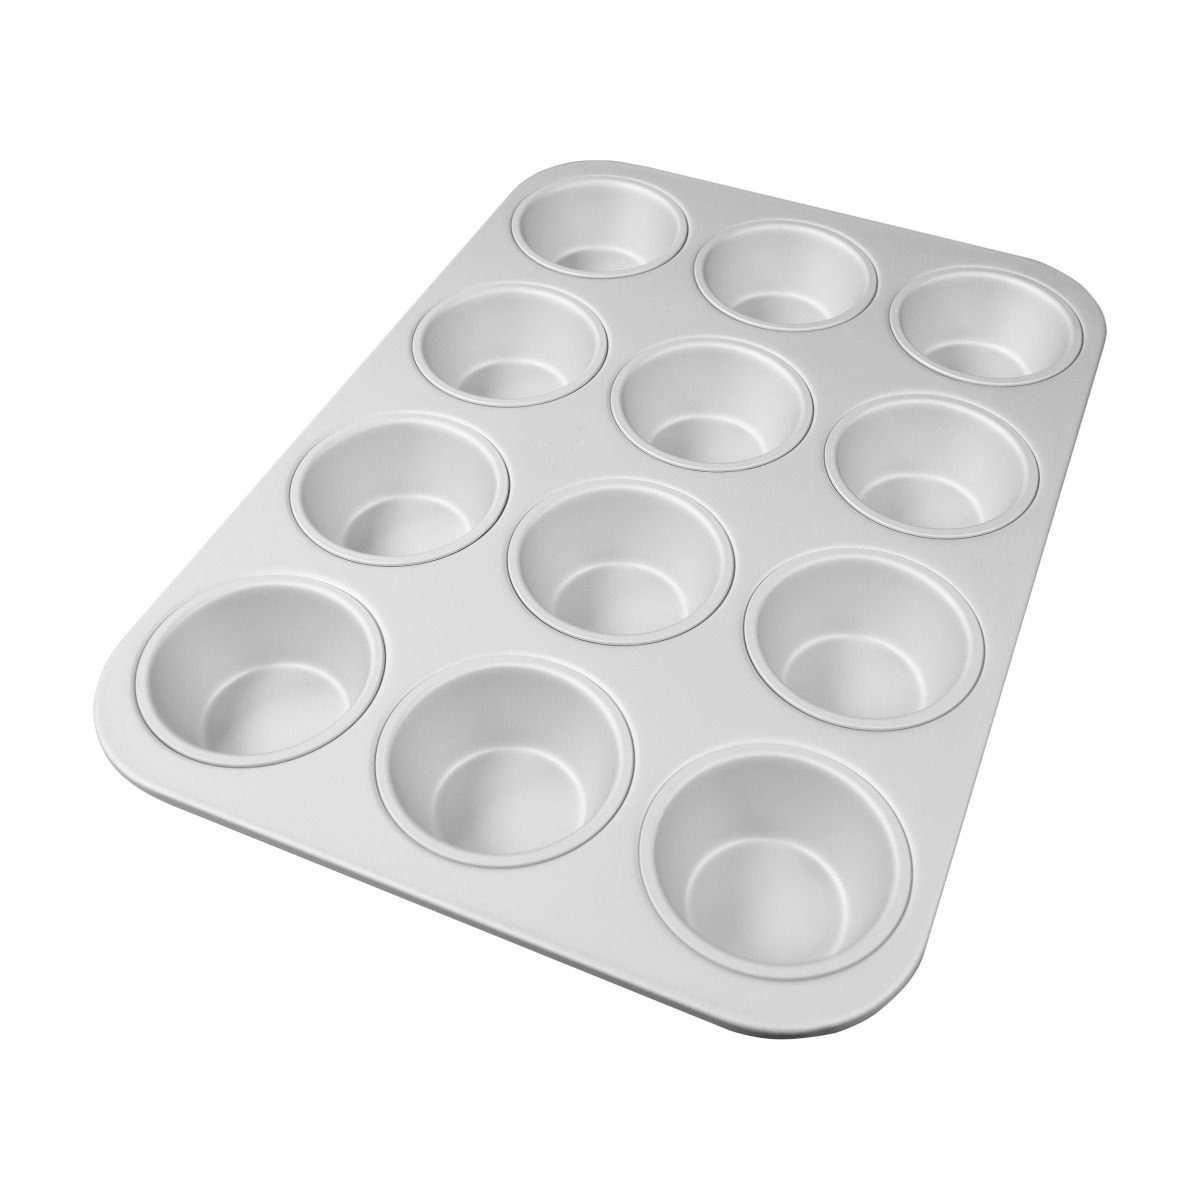 Fat Daddio's ProSeries Anodized Aluminum Mini Fluted Cupcake & Muffin Pan,  6 Count